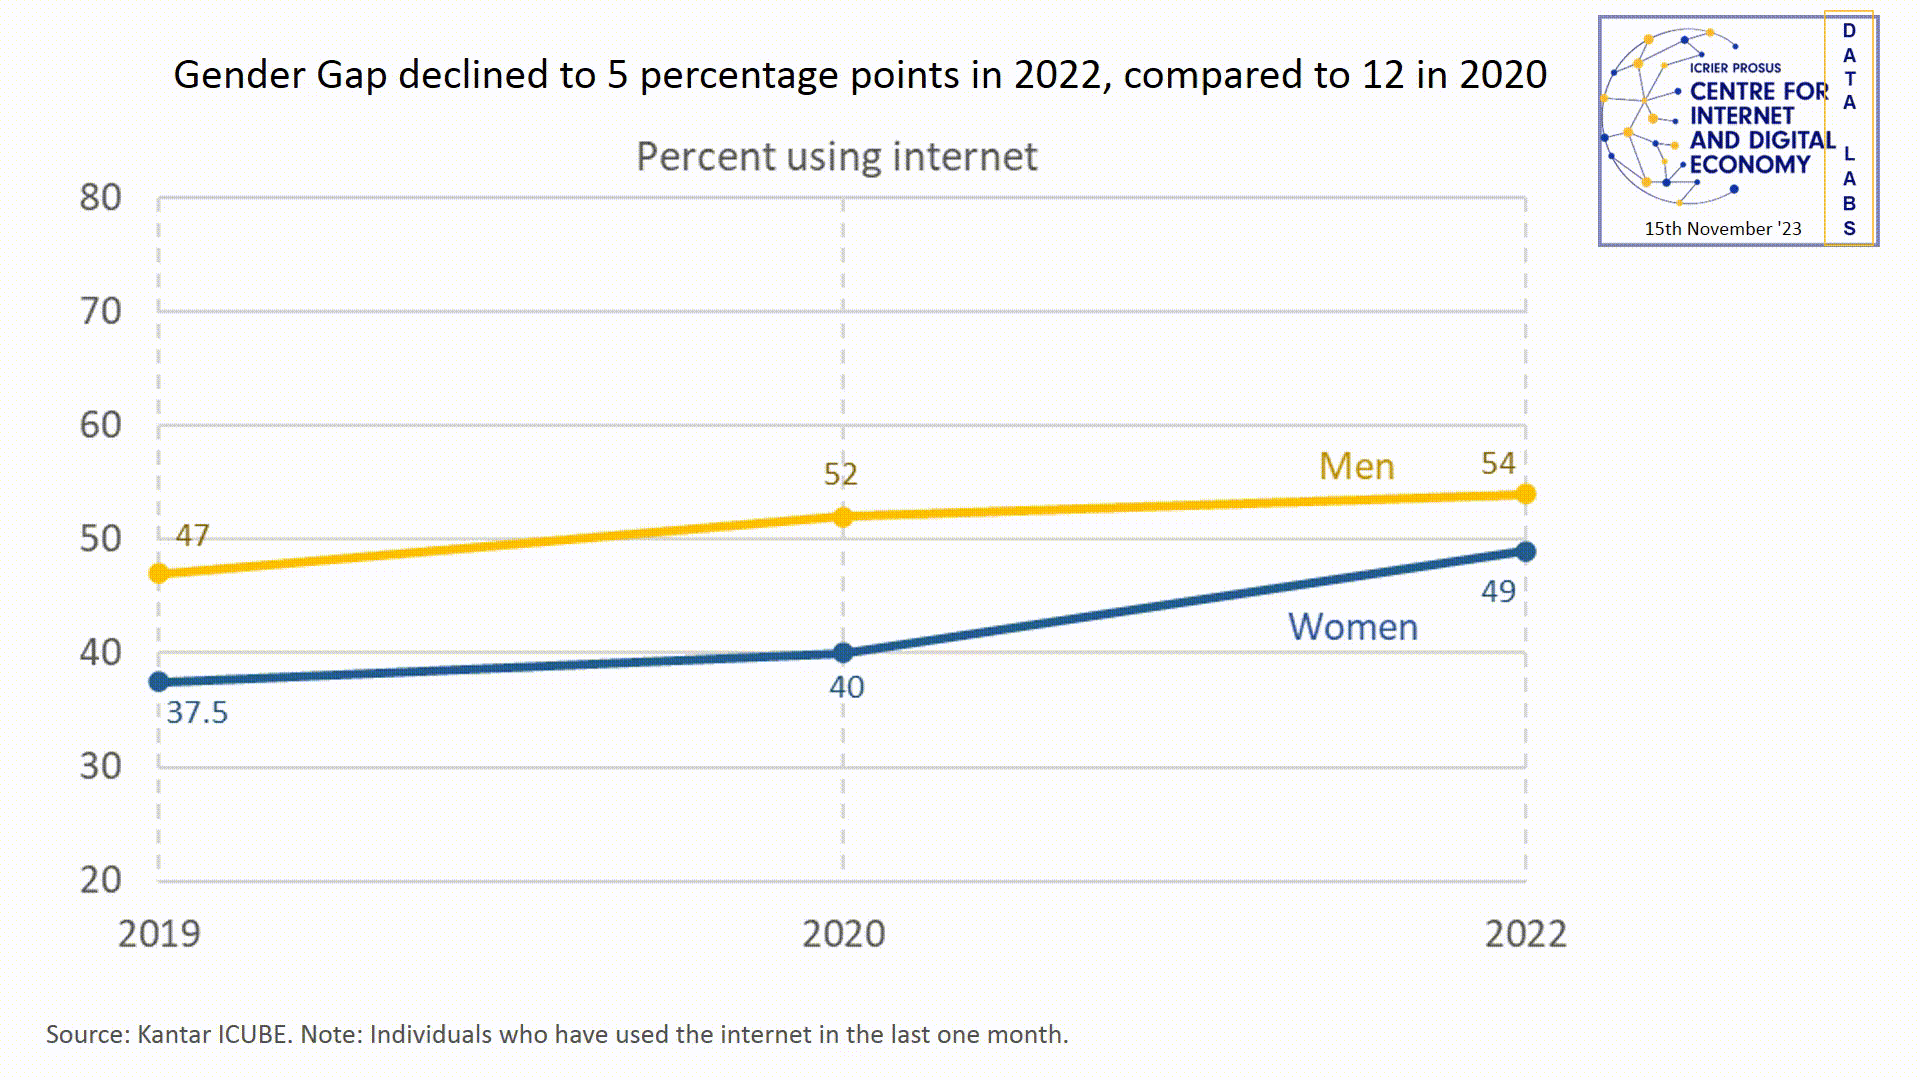 ConnectingHER: Rural Women are driving down the Gender Gap in Internet Usage